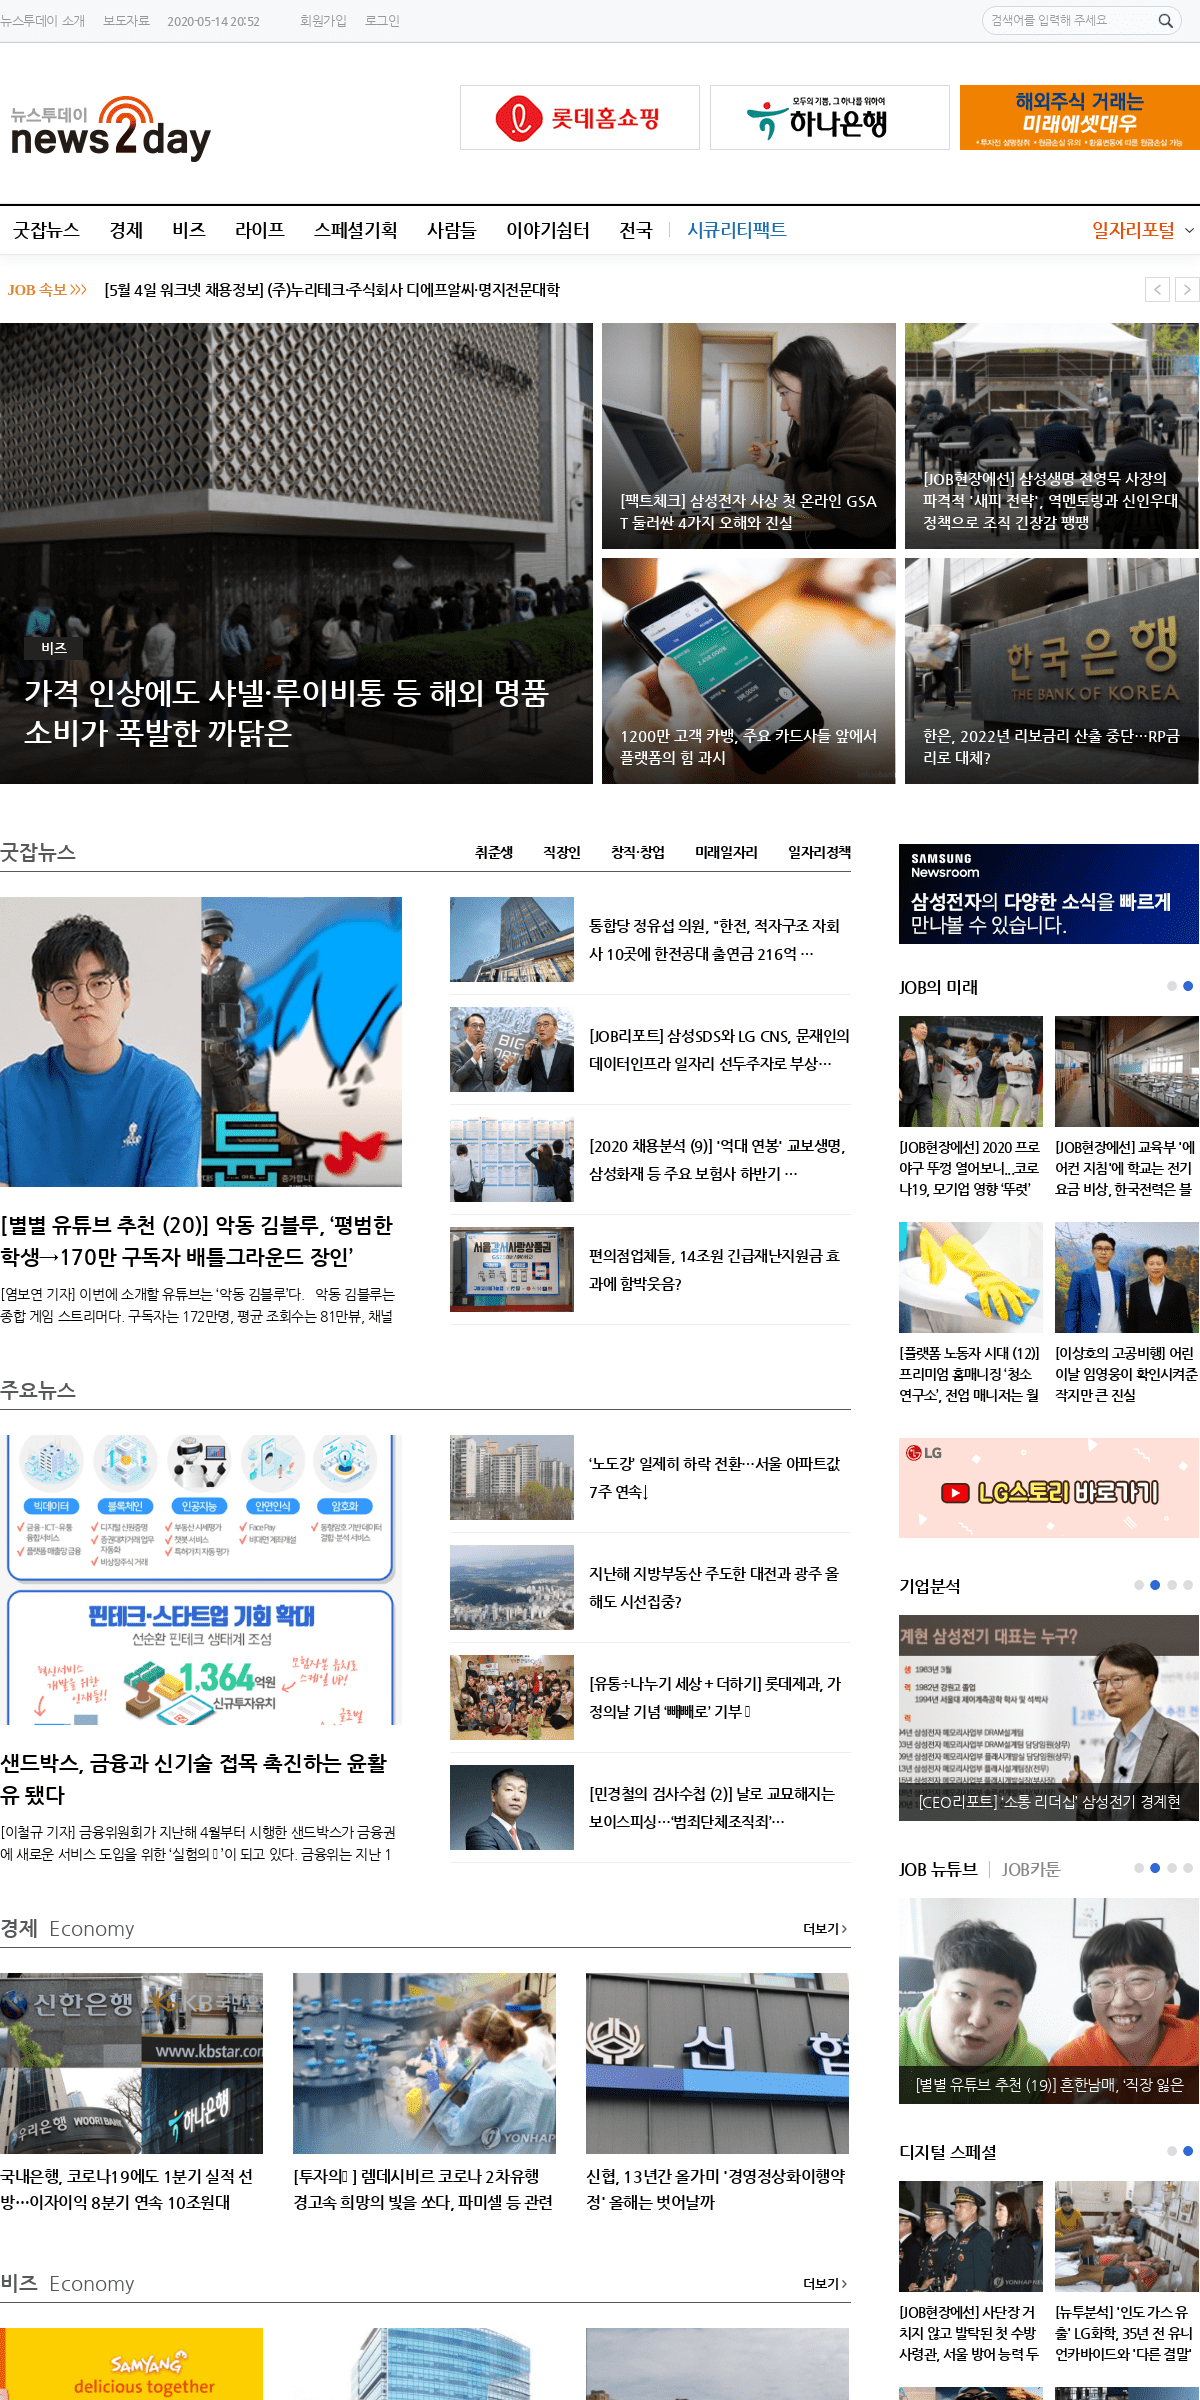 A complete backup of news2day.co.kr